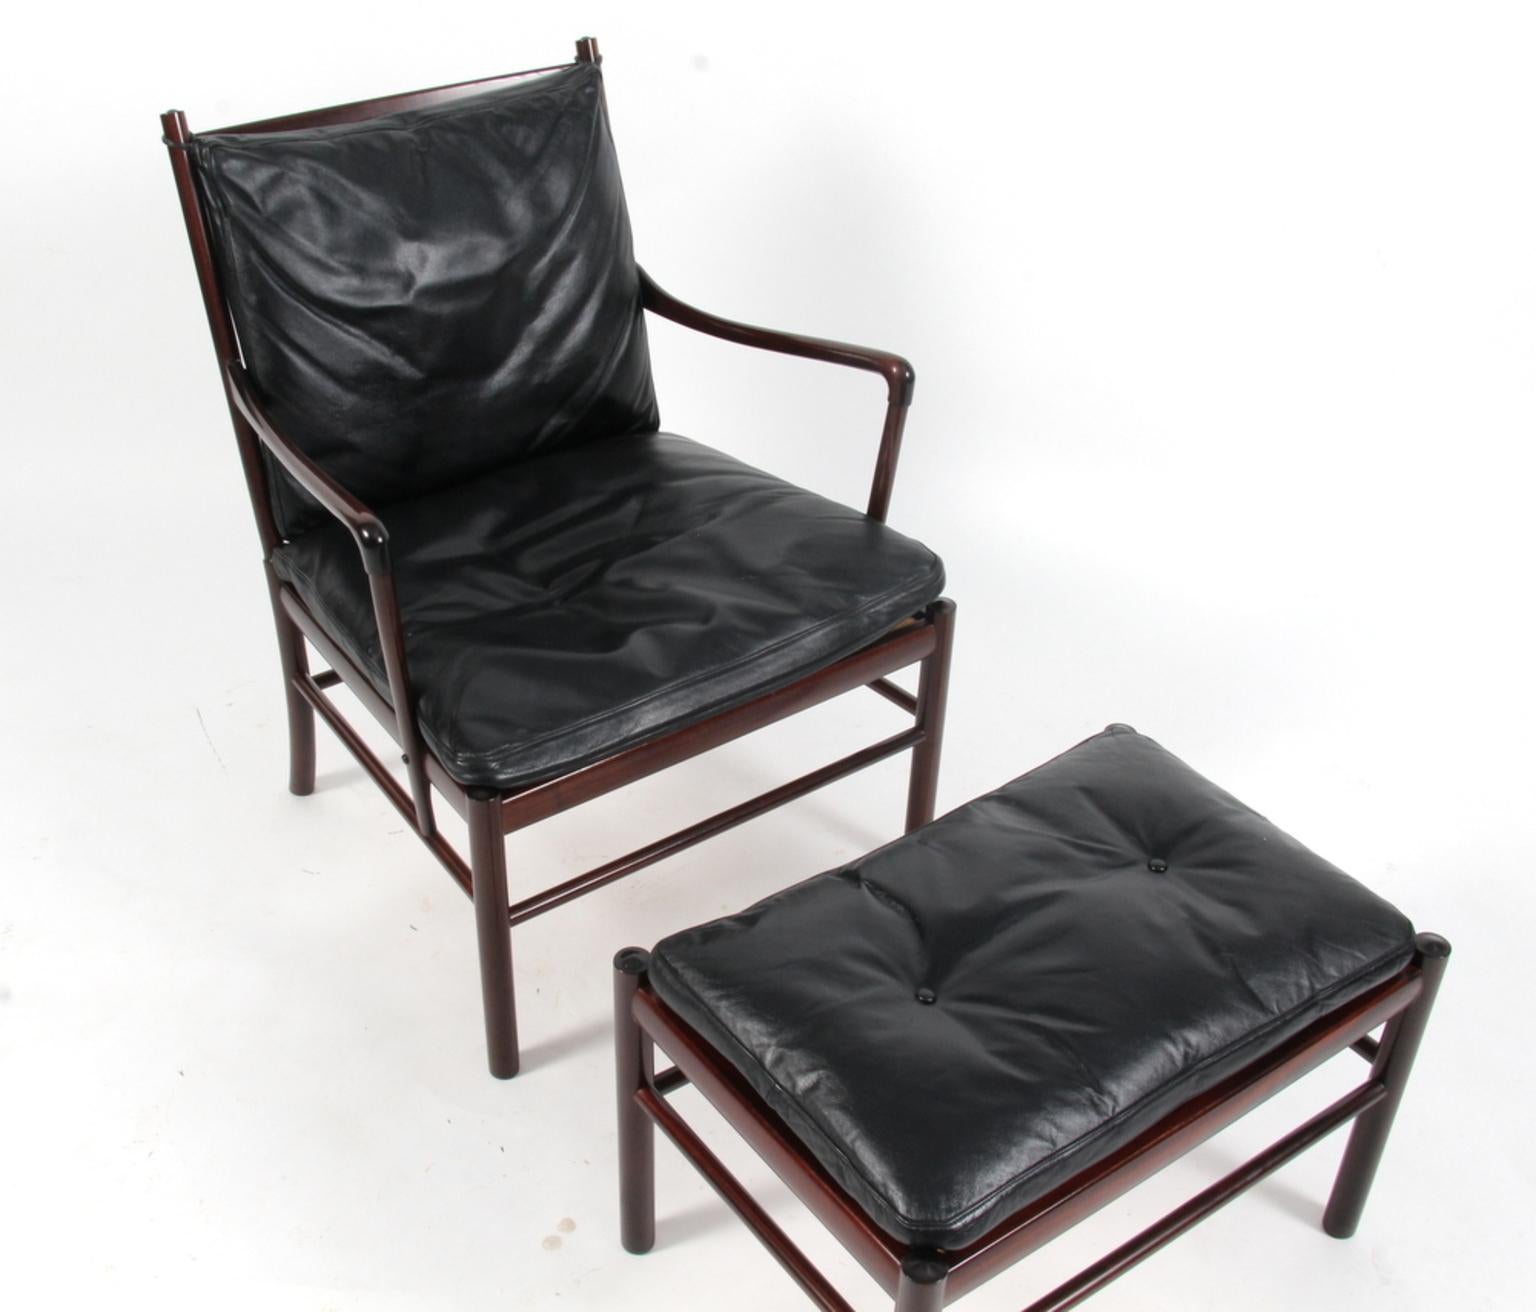 Ole Wanscher lounge chair and ottoman original upholstered with black leather.

Made in mahogany. 

Model PJ 149 colonial chair, made by Poul Jeppesen.